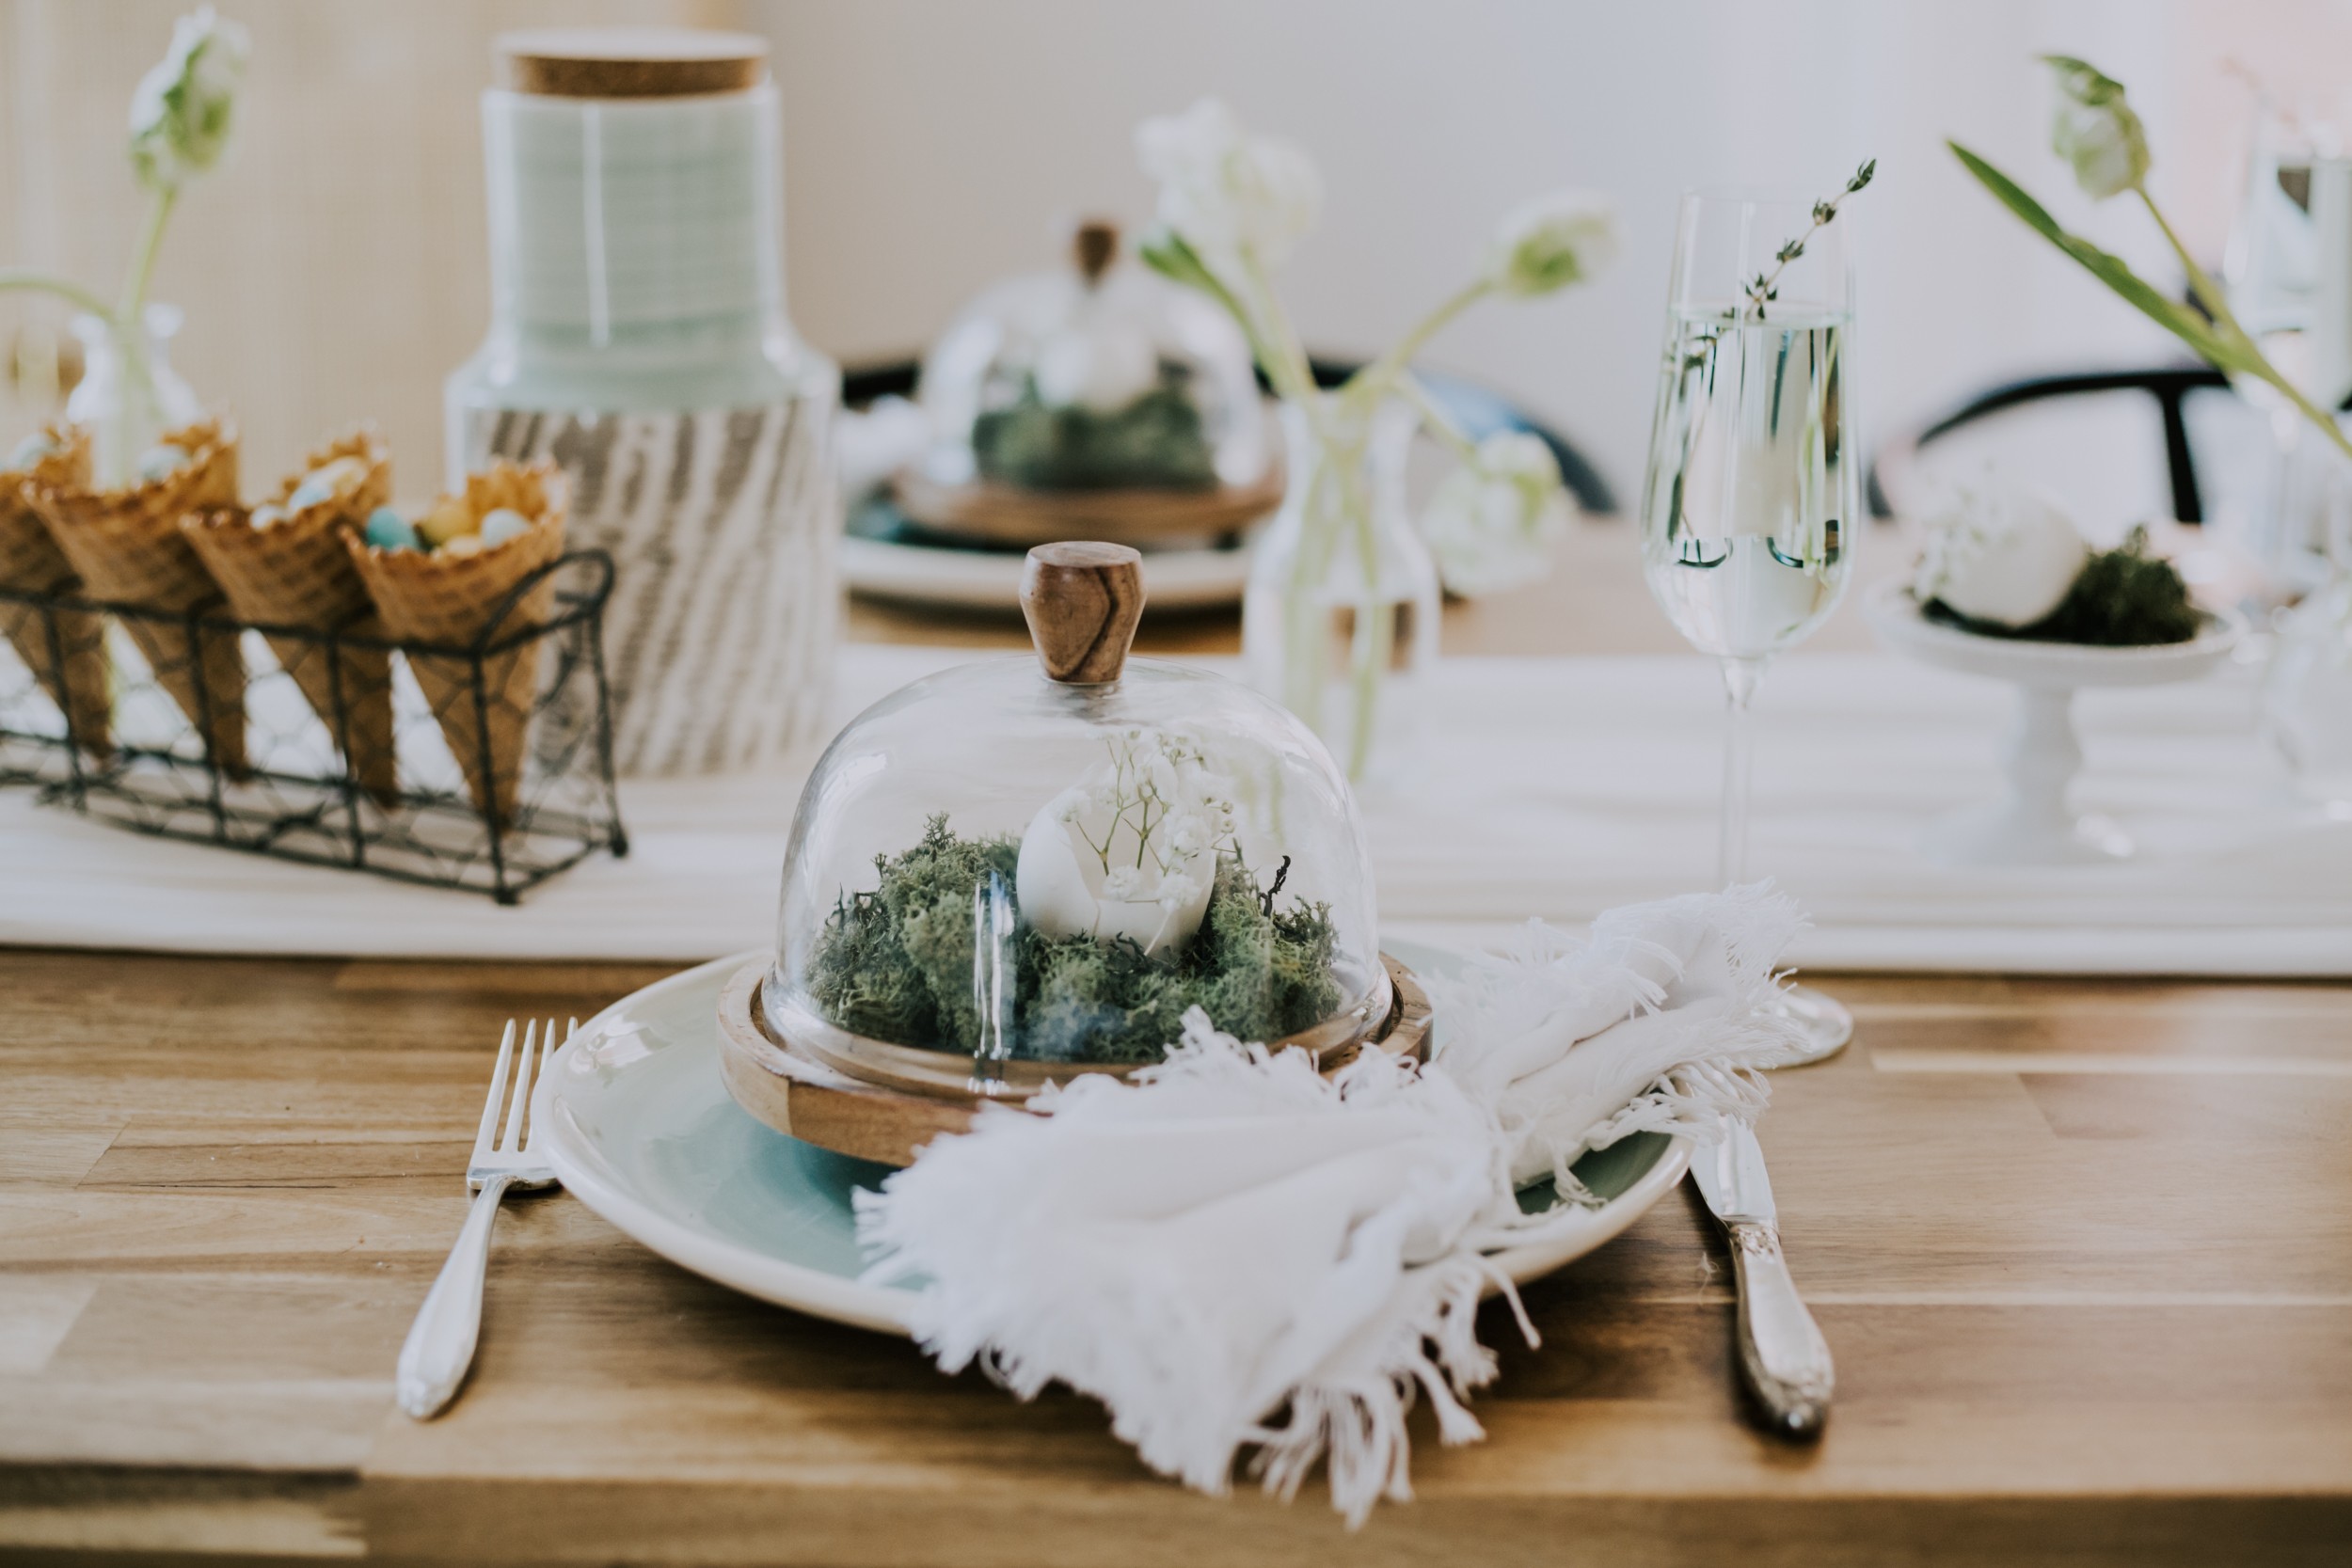 Organic and elegant easter tablescape decor. Teal plates with antique silverware, wooden globes filled with moss and a cracked egg filled with white flowers. 